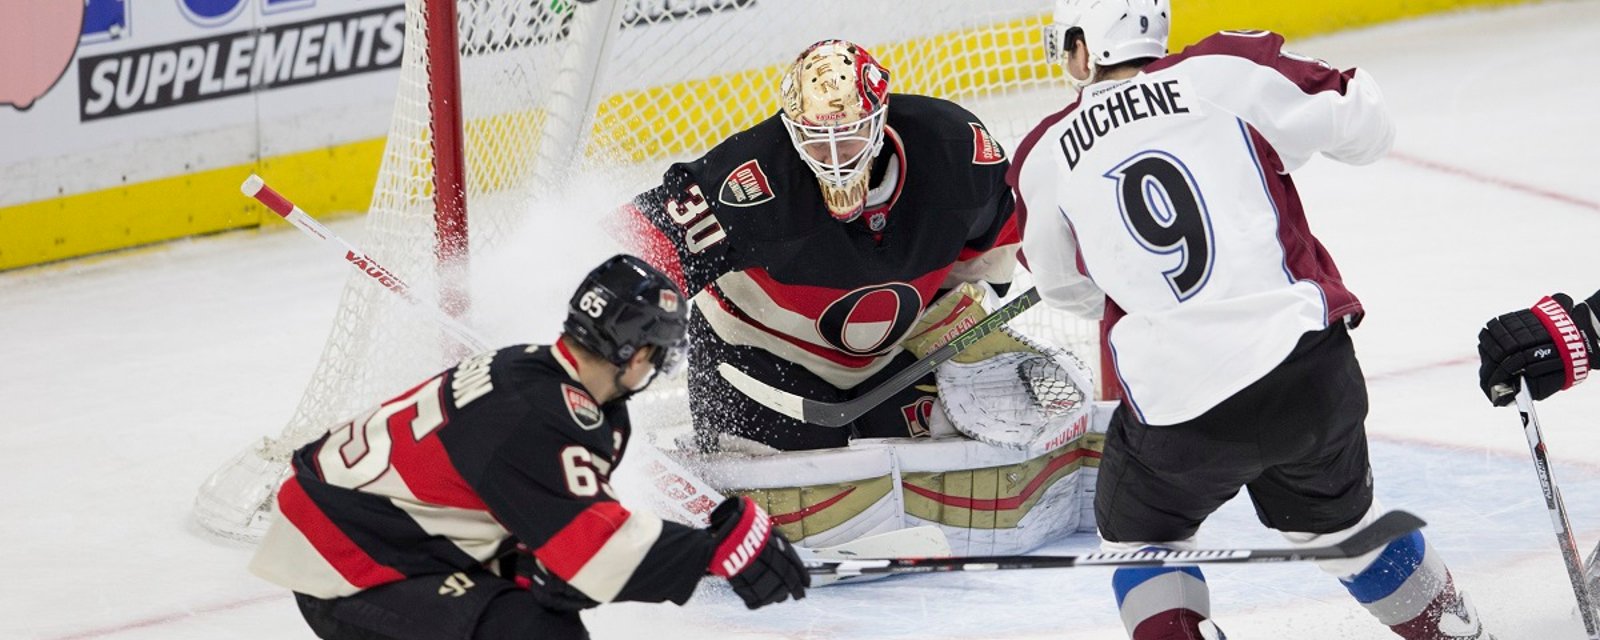 Rumor: The Senators have rejected a crazy trade offer from the Avalanche.